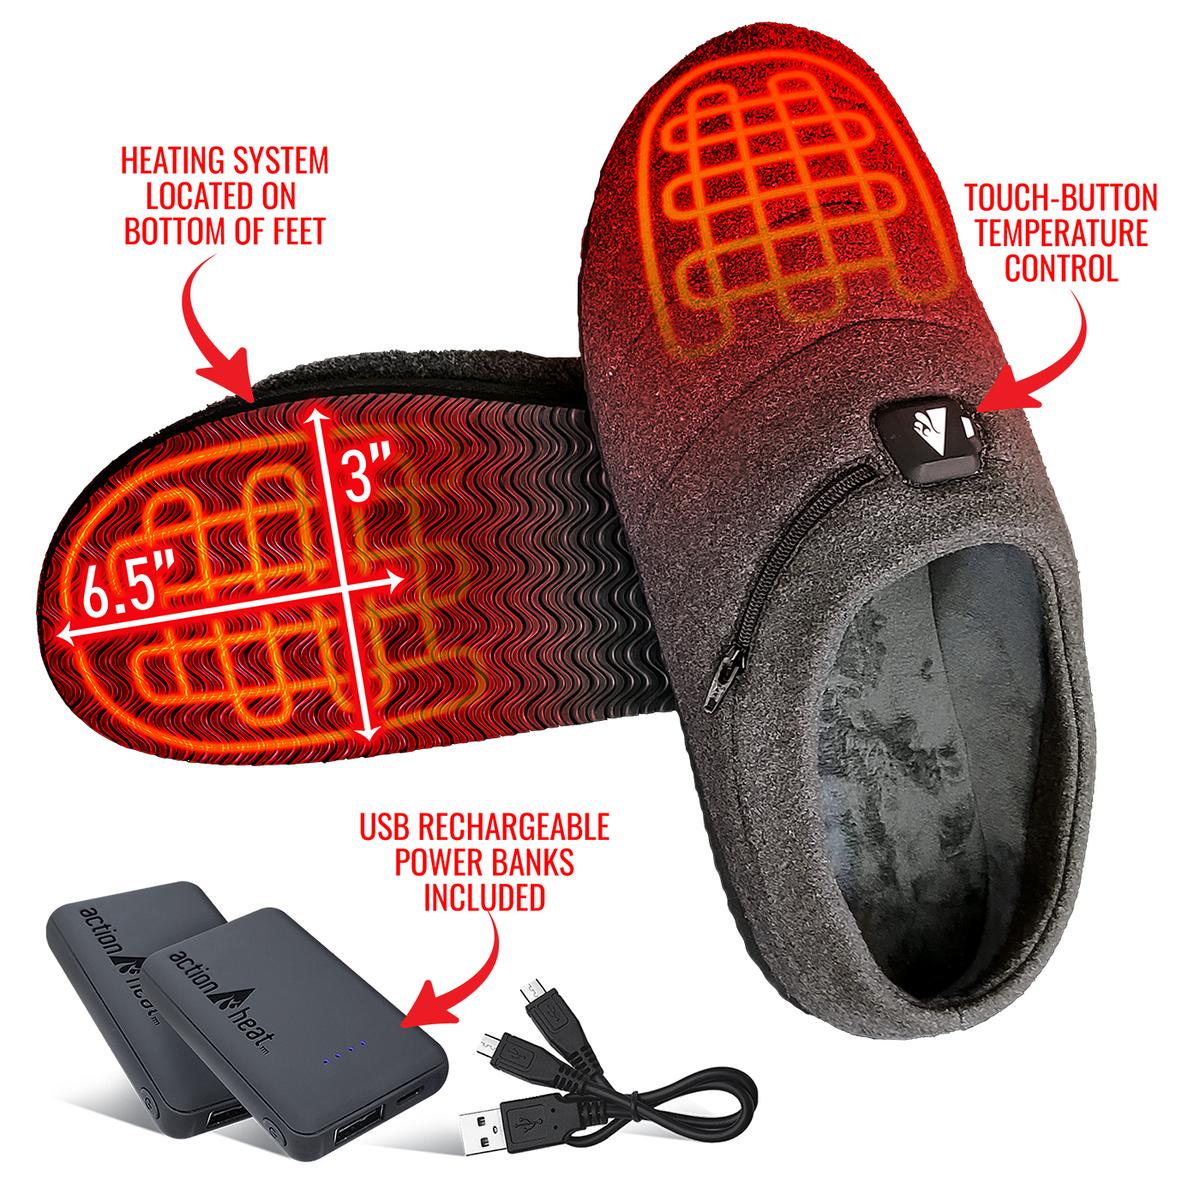 ACTION HEAT AA Battery Heated Slippers (For Men) - Save 42%